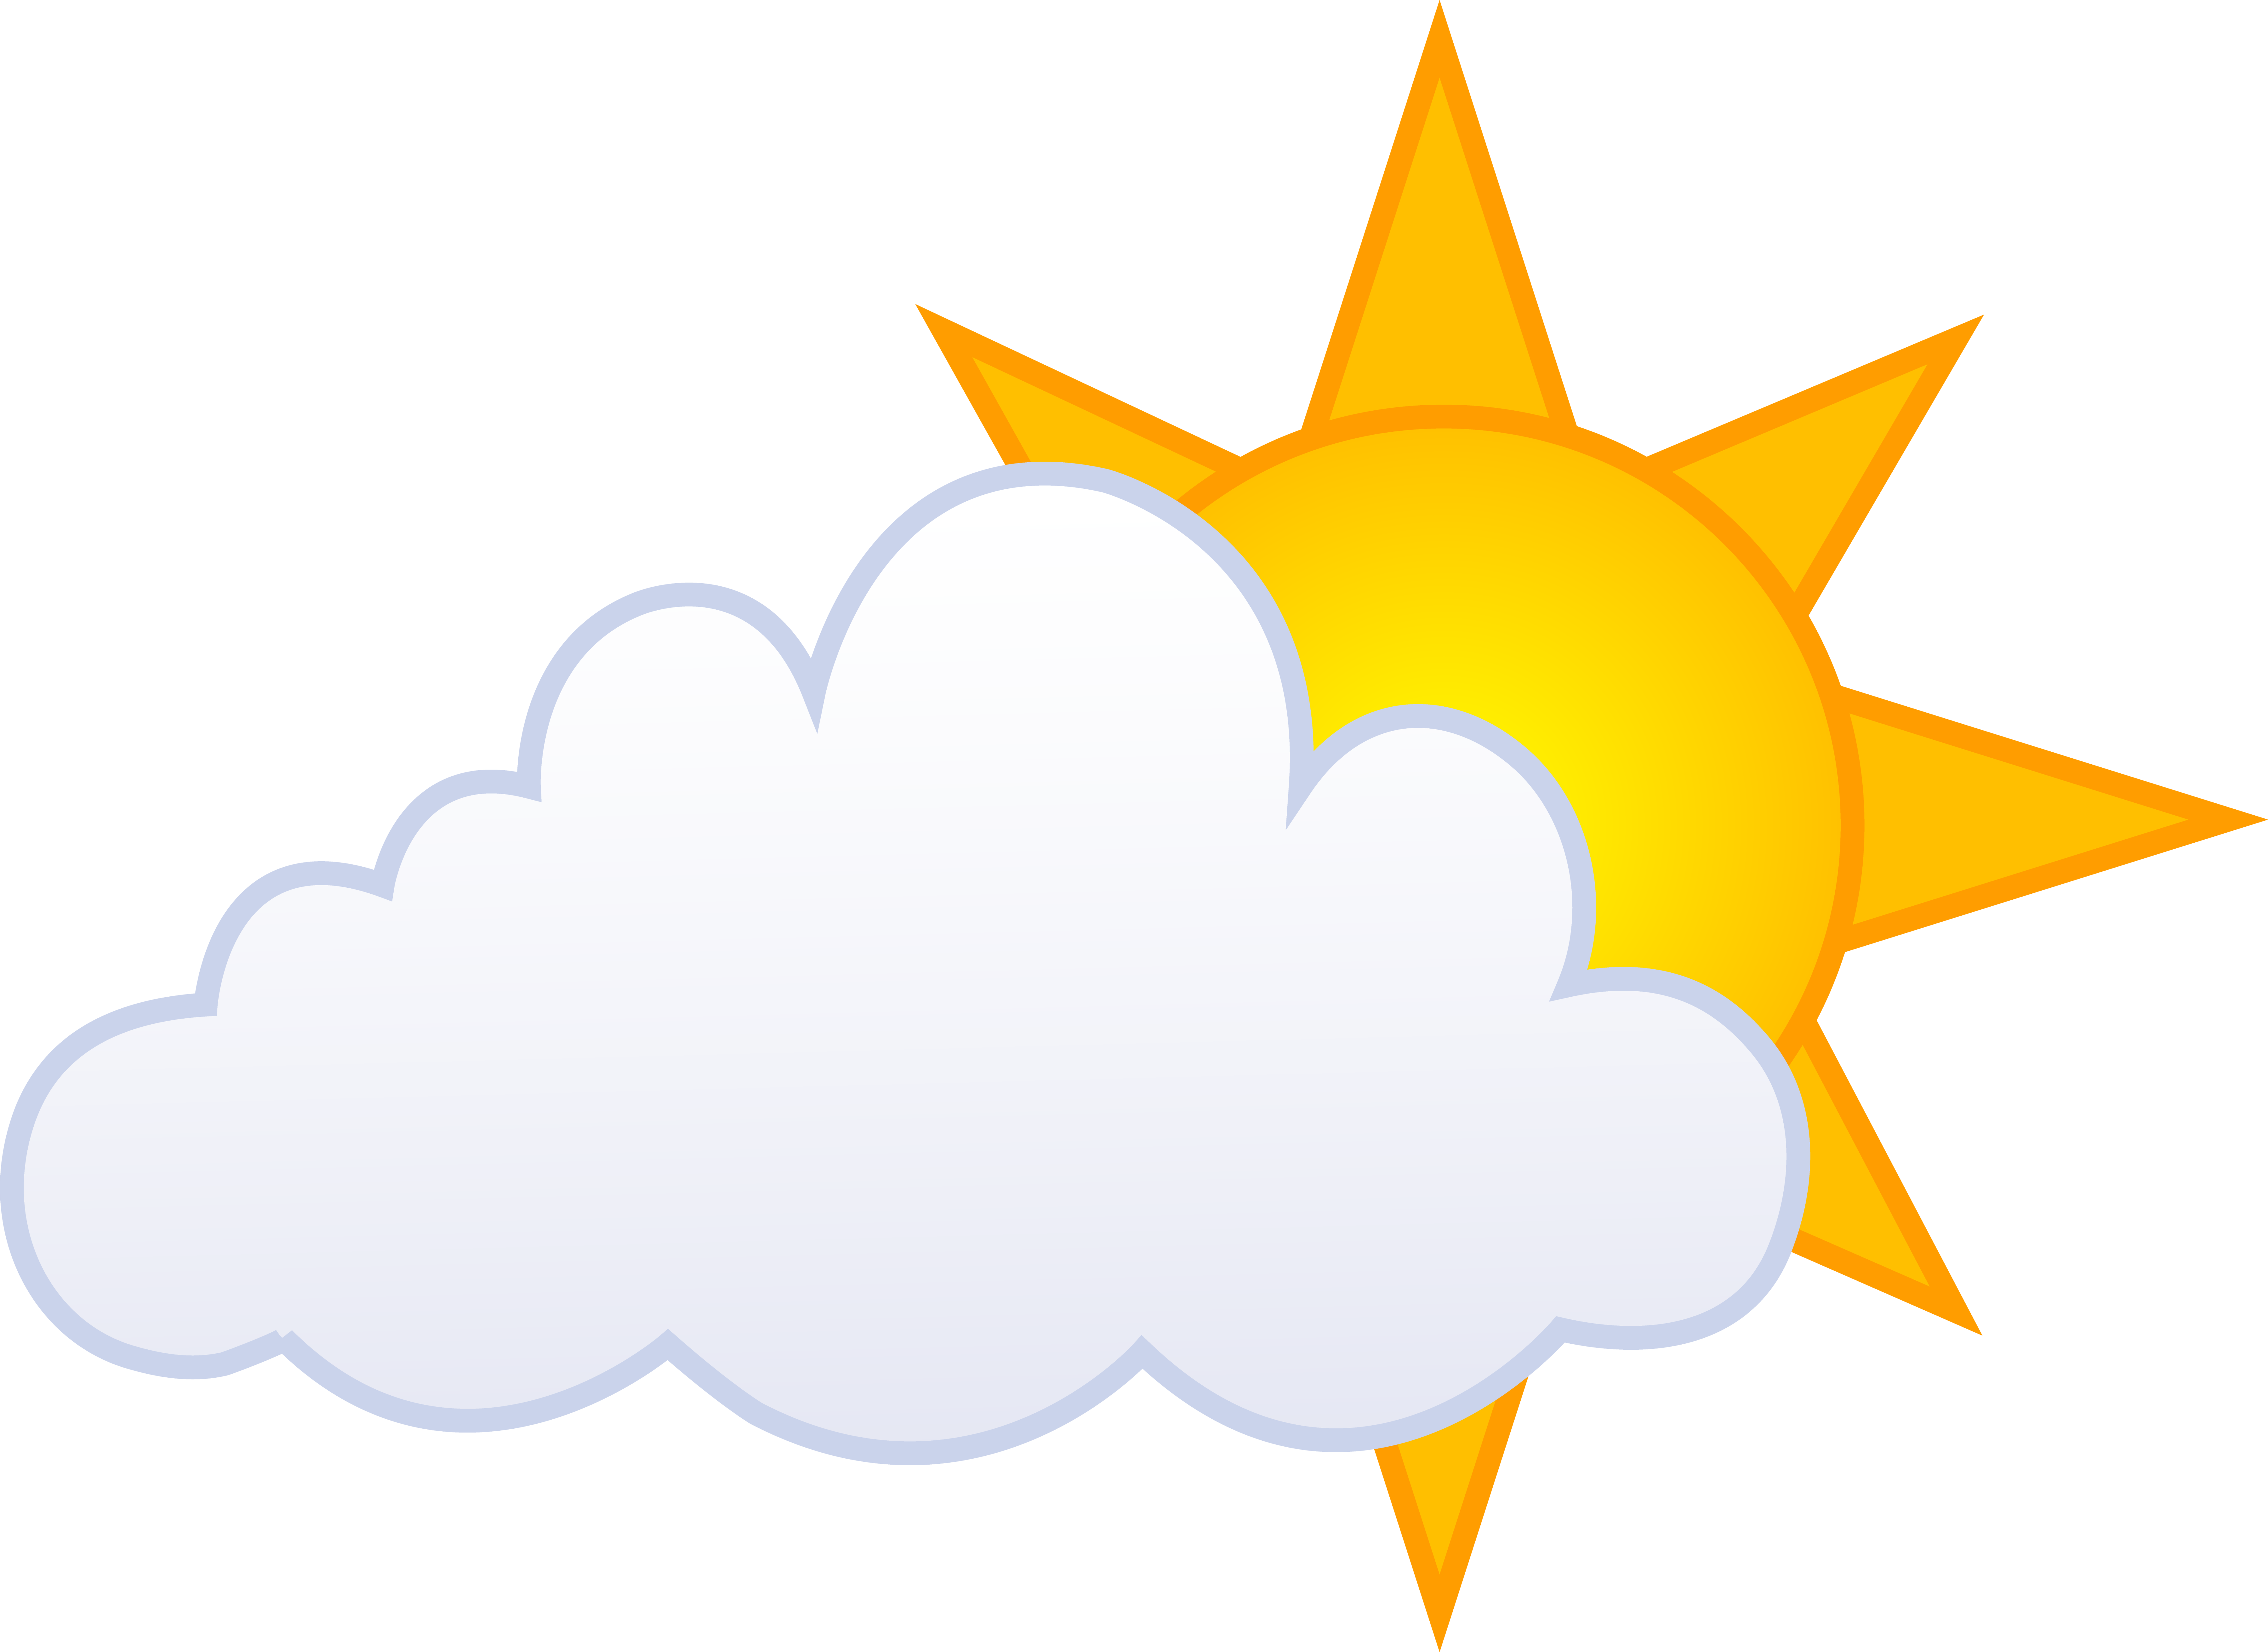 Cloudy weather clipart